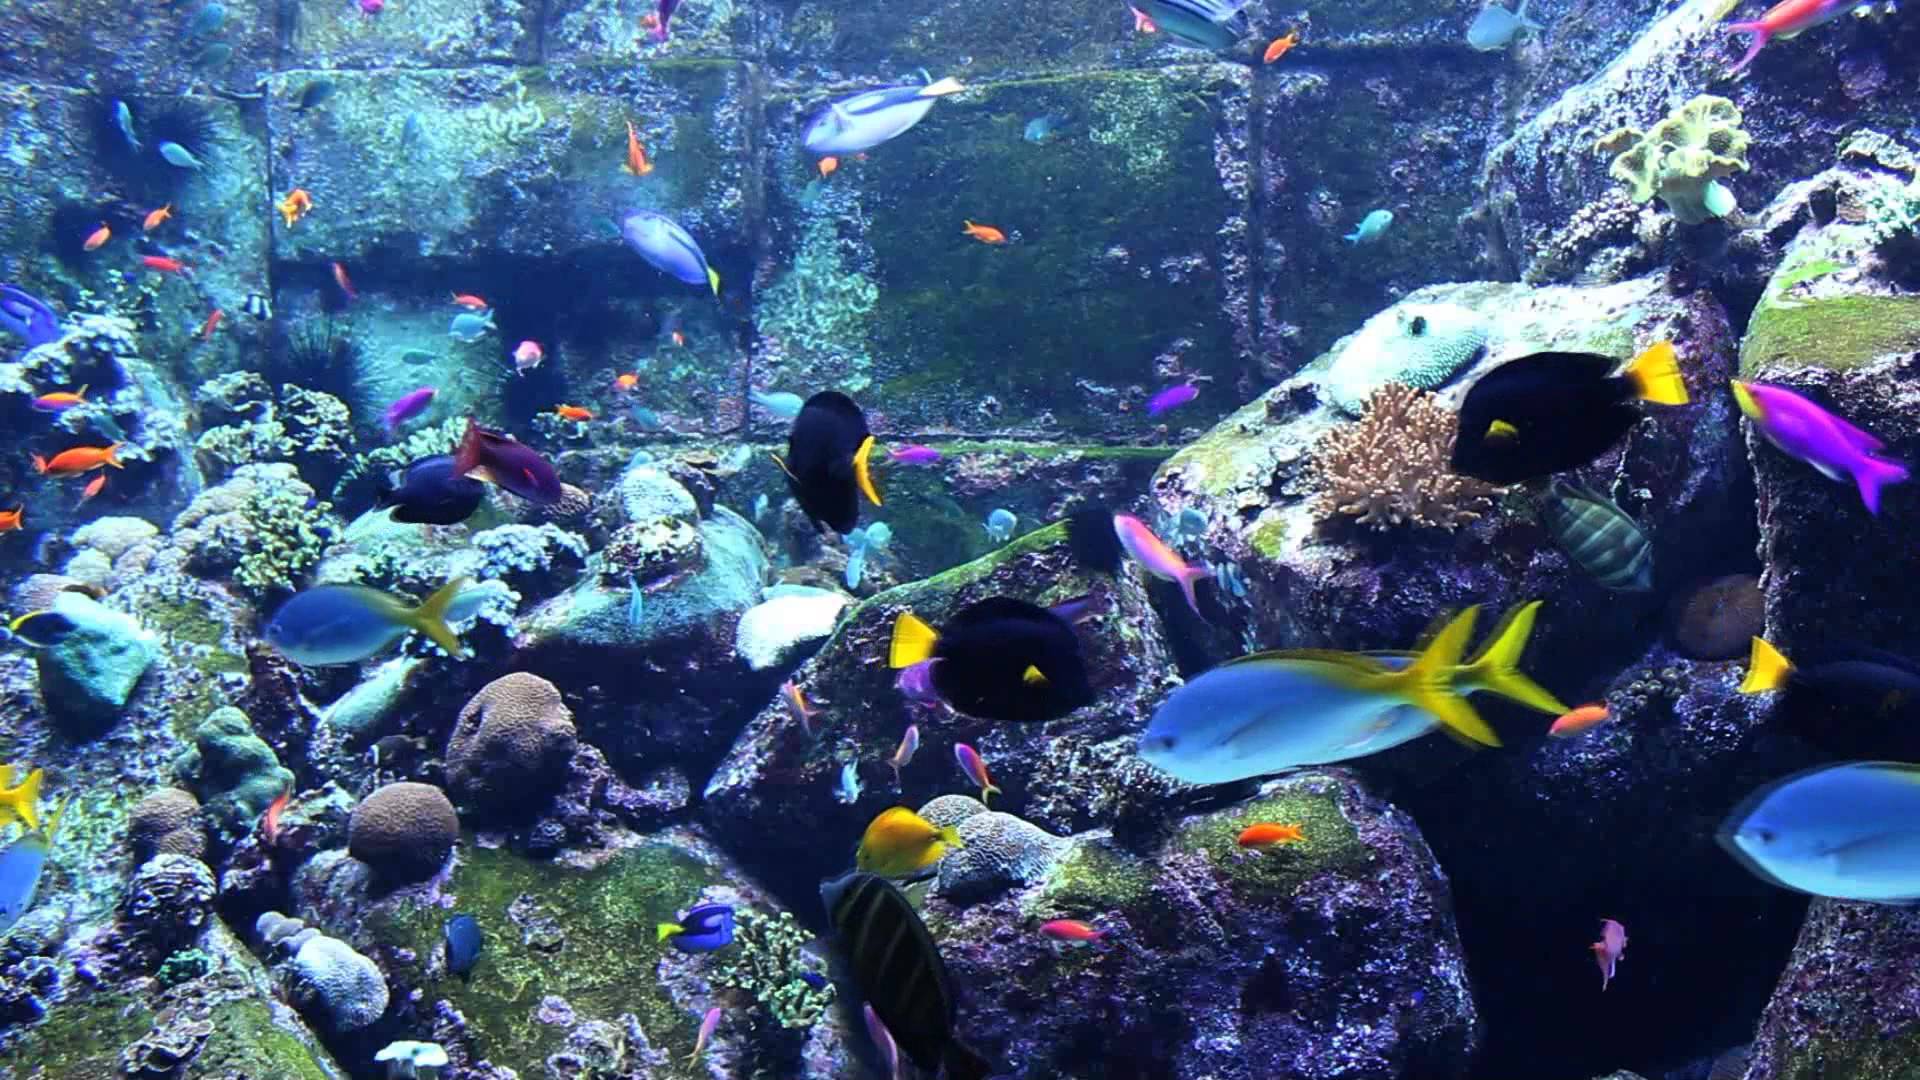 Nice Images Collection: Fish Tank Desktop Wallpapers